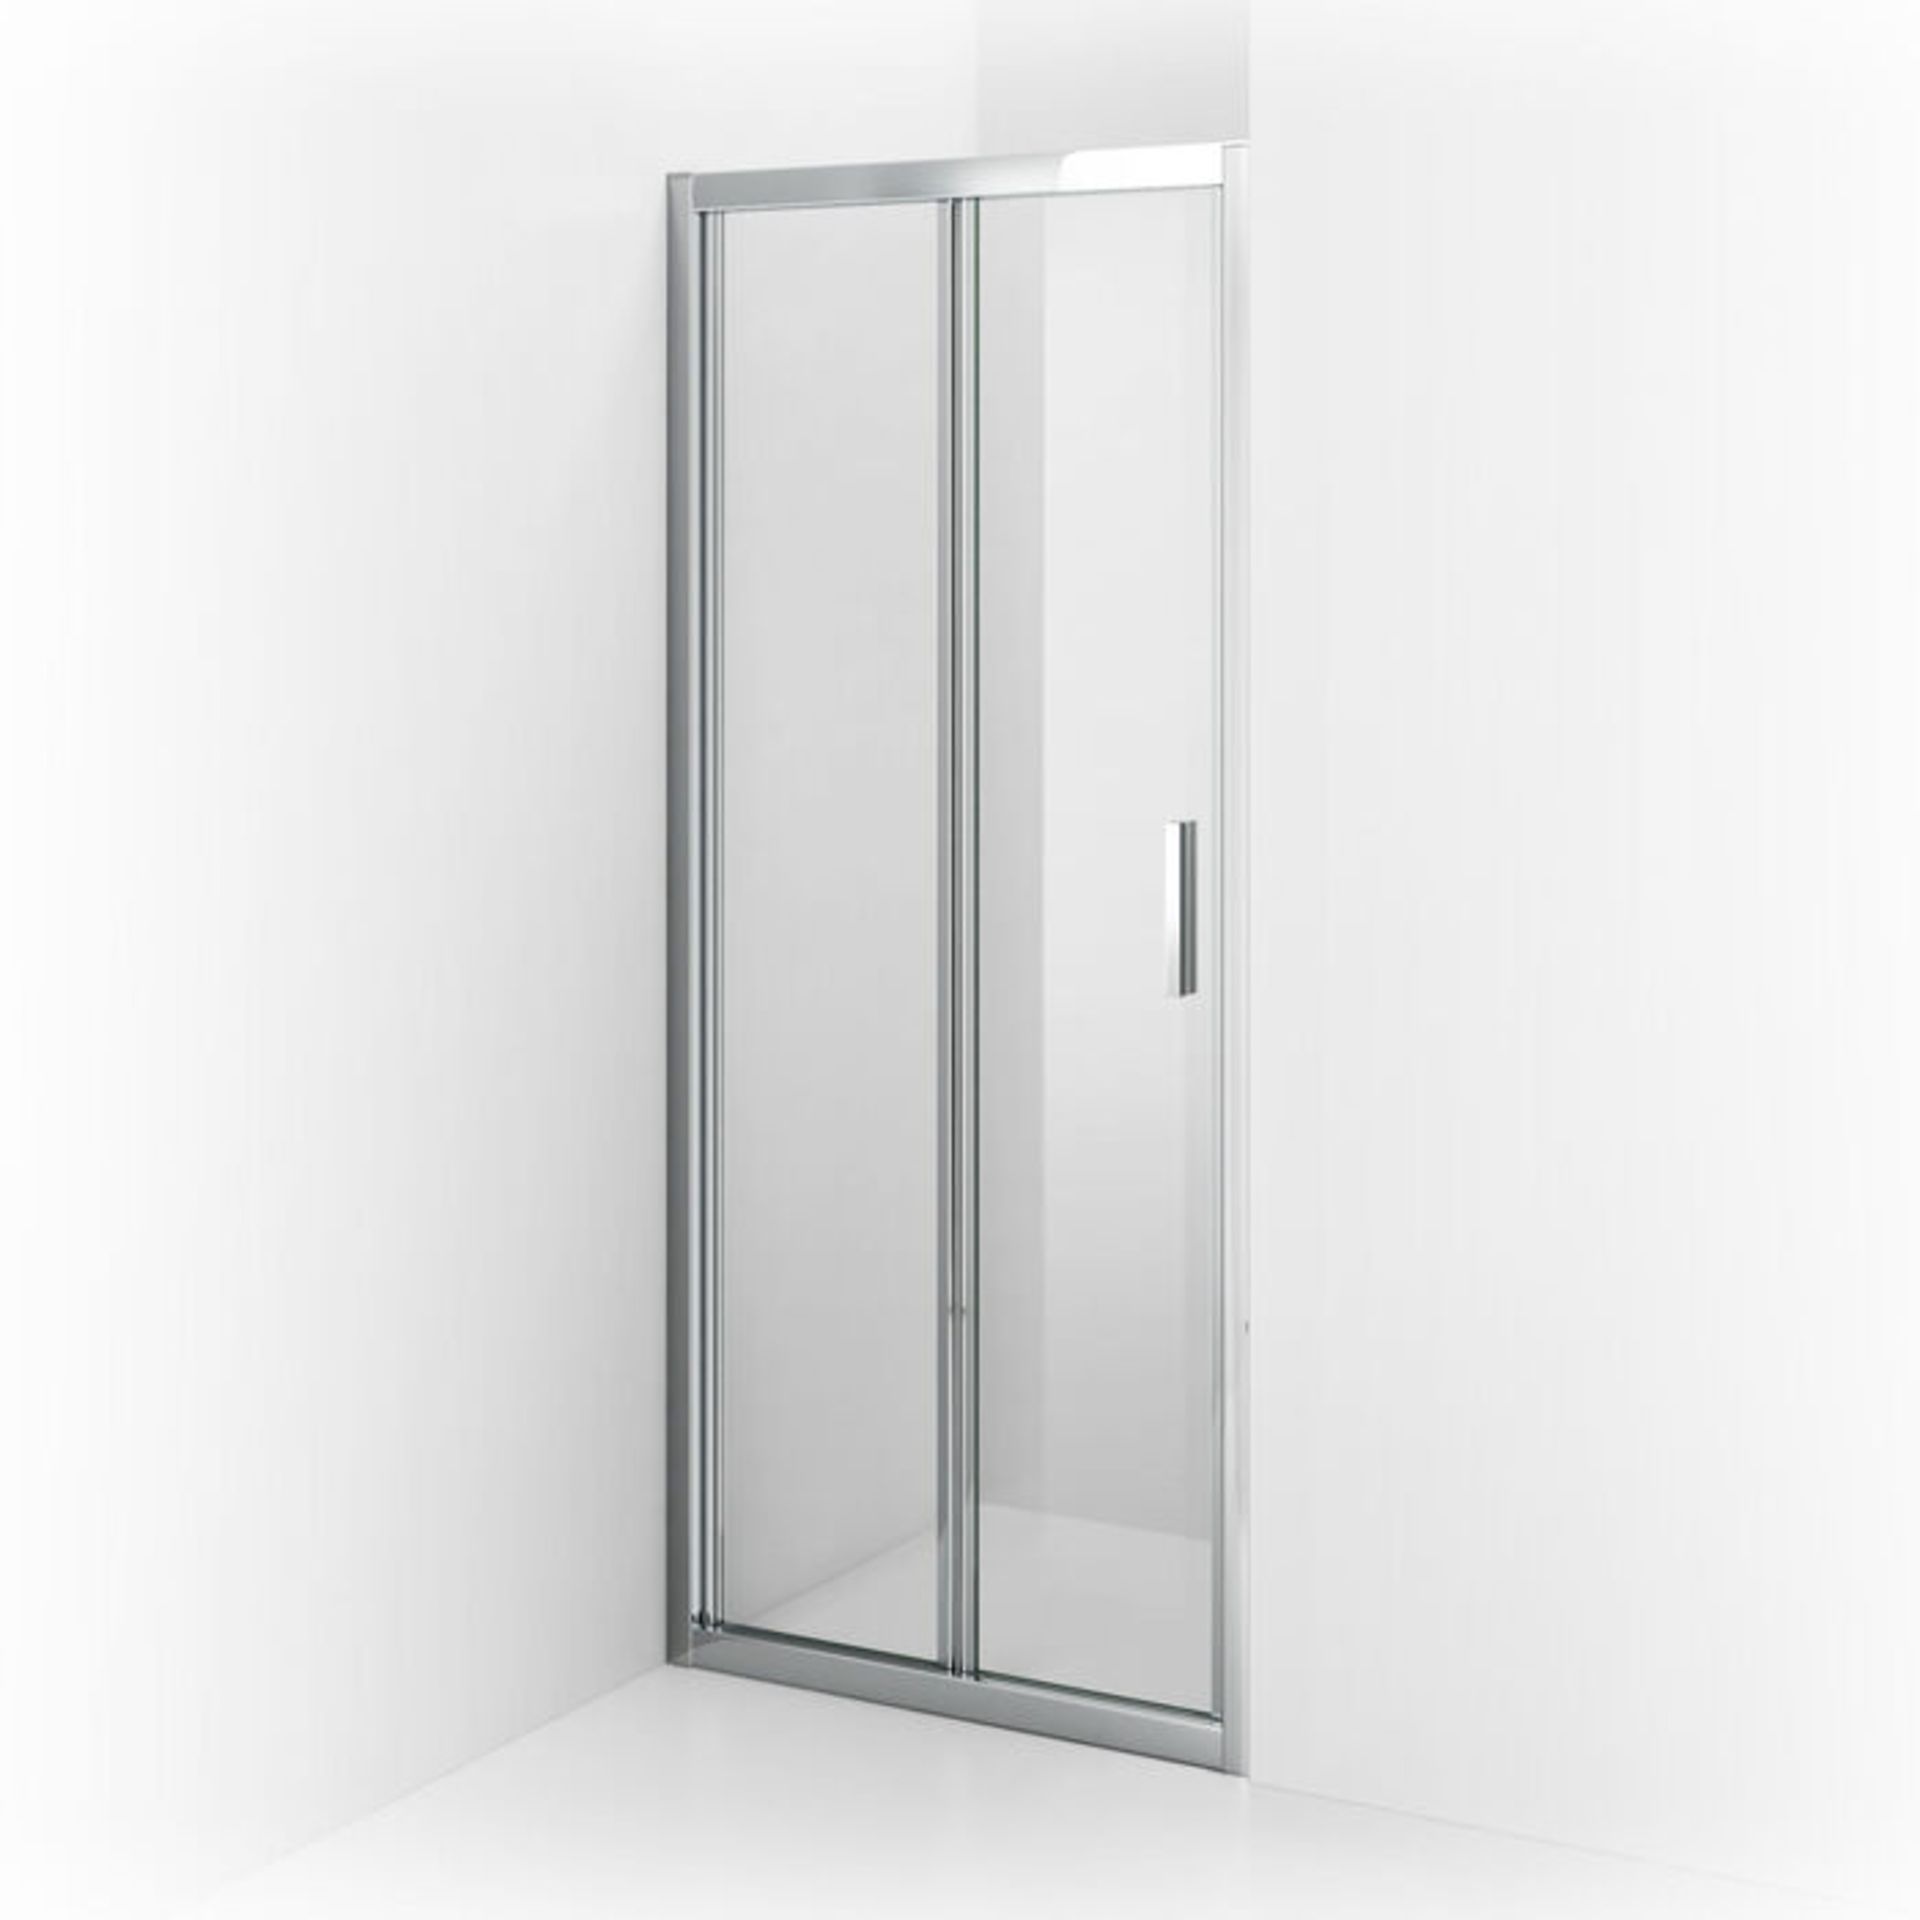 (H95) 800mm - 6mm - Elements EasyClean Bifold Shower Door. RRP £299.99. mm Safety Glass - Sing... - Image 4 of 5